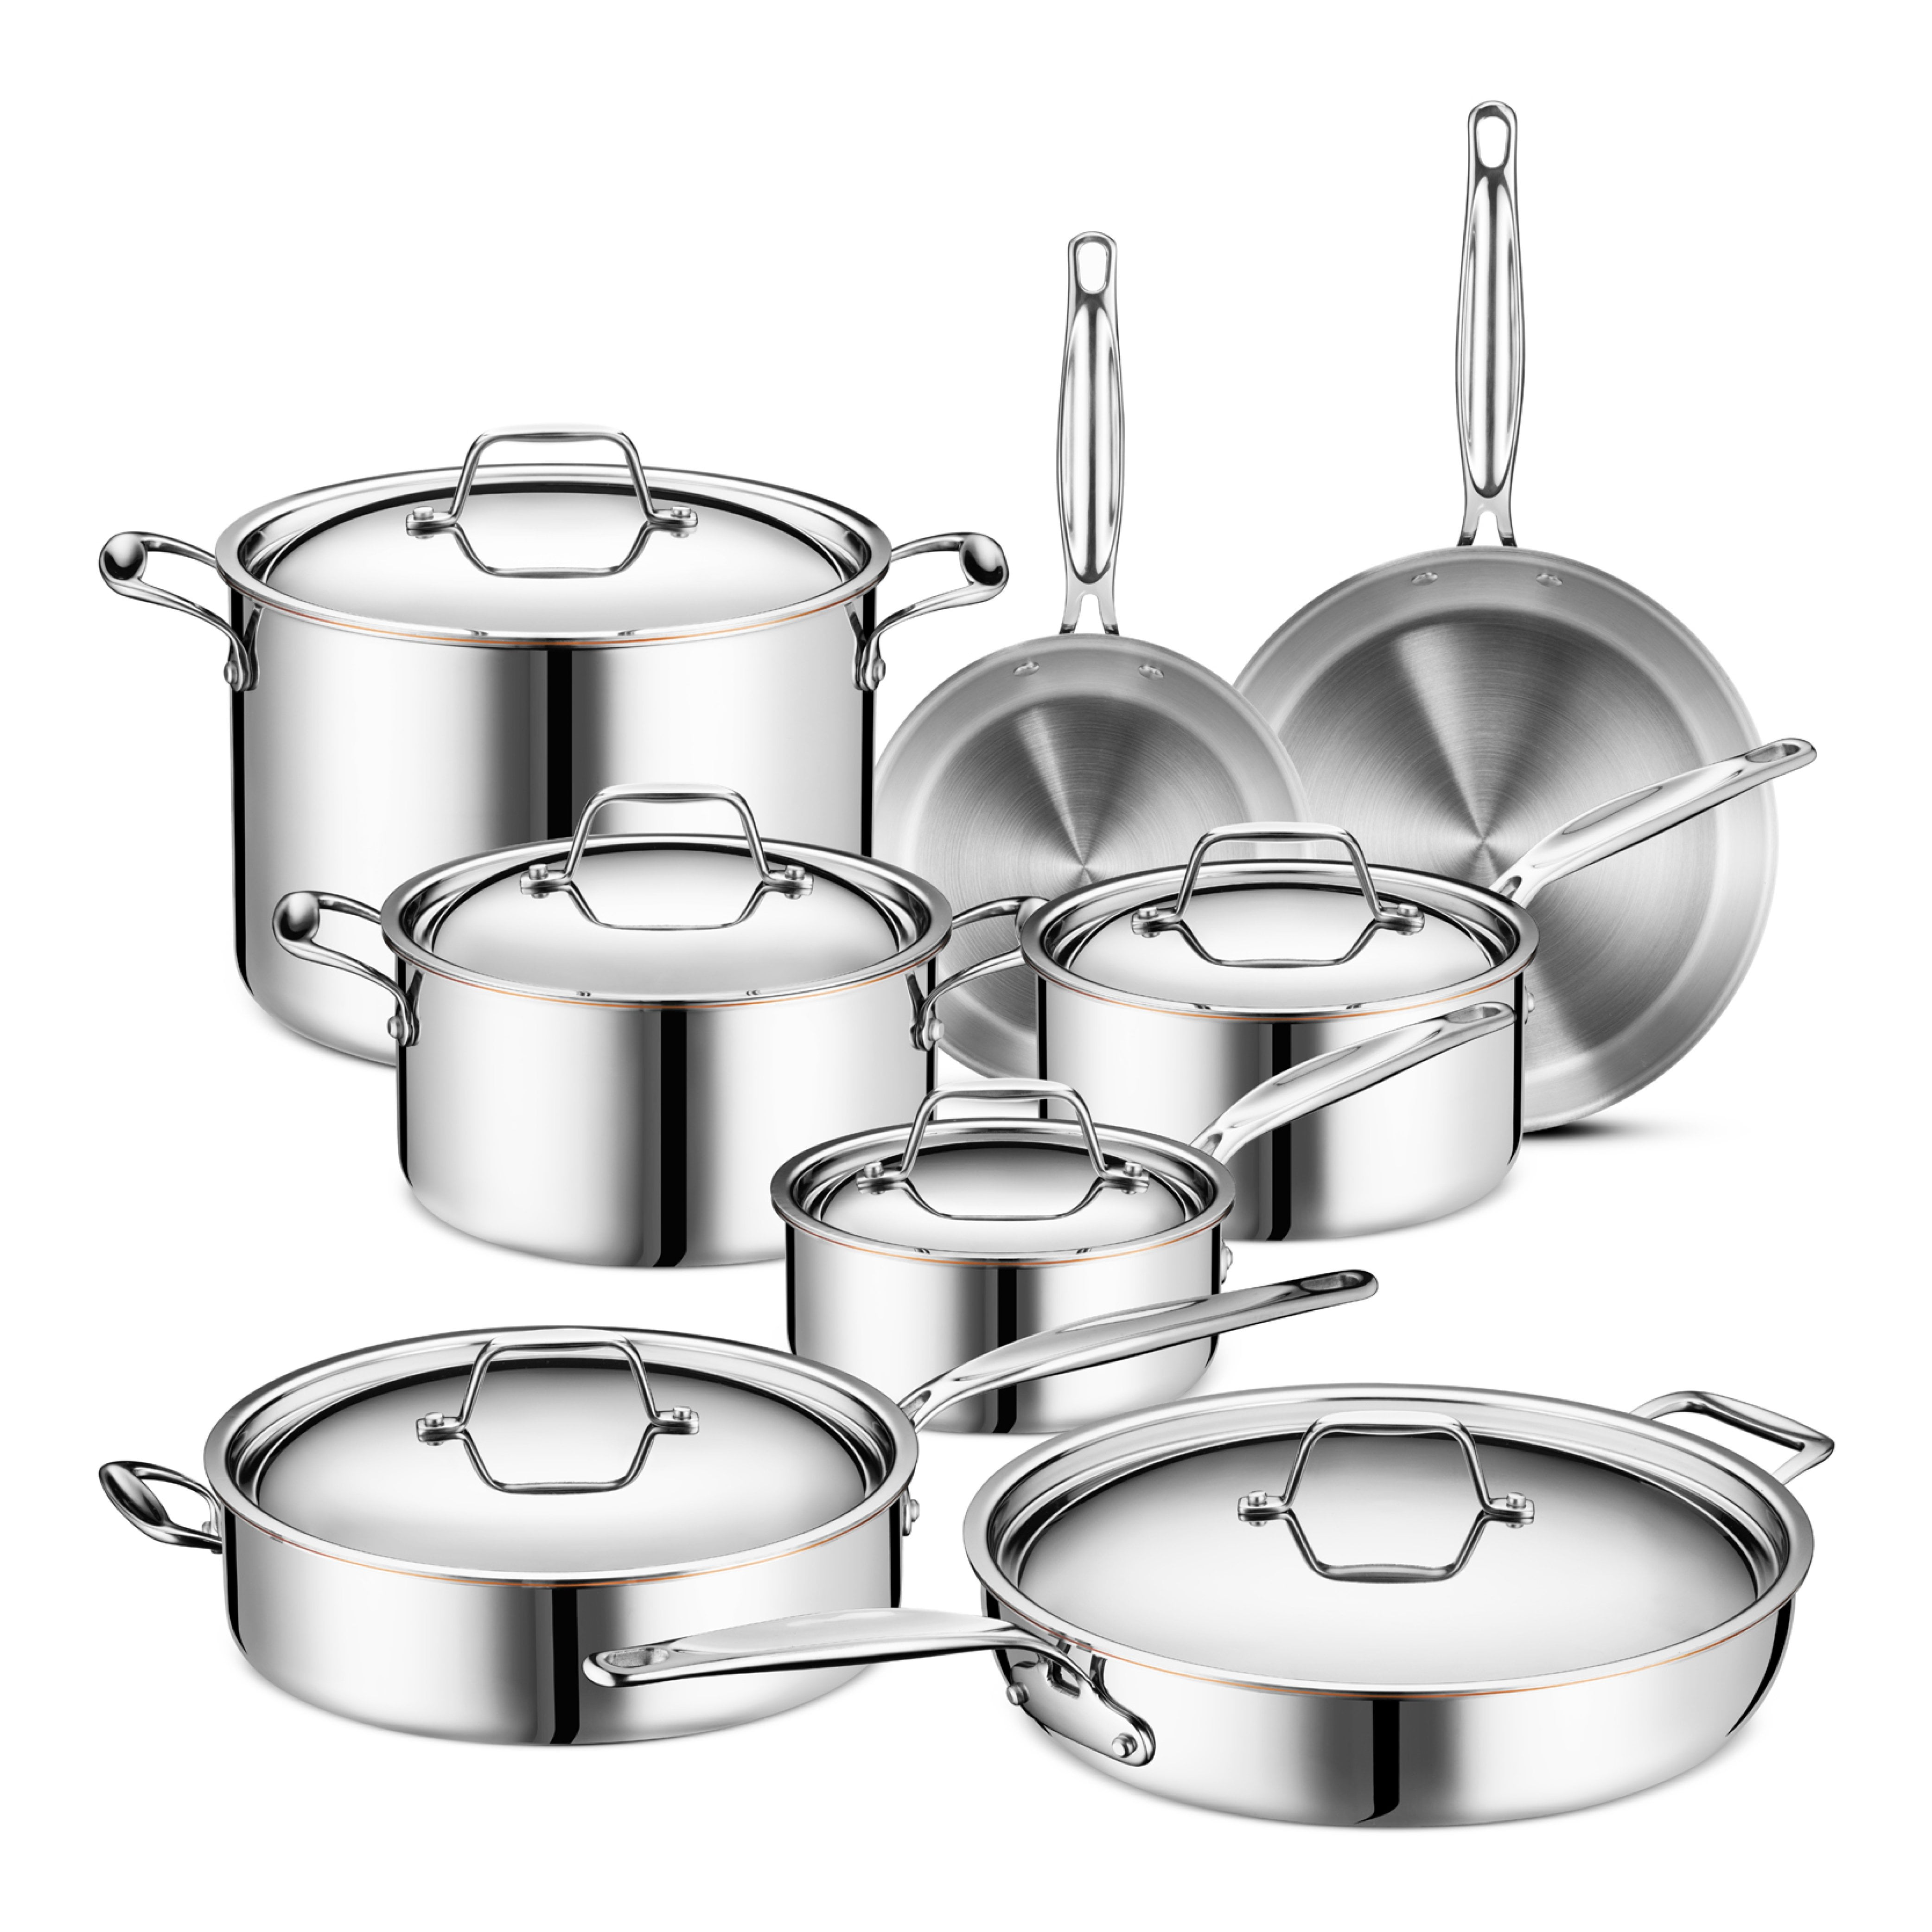 Legend 14 pc Copper Core Stainless Steel Pots & Pans Set | Pro Quality  5-Ply Clad Cookware | Professional Chef Grade Home Cooking, All Kitchen